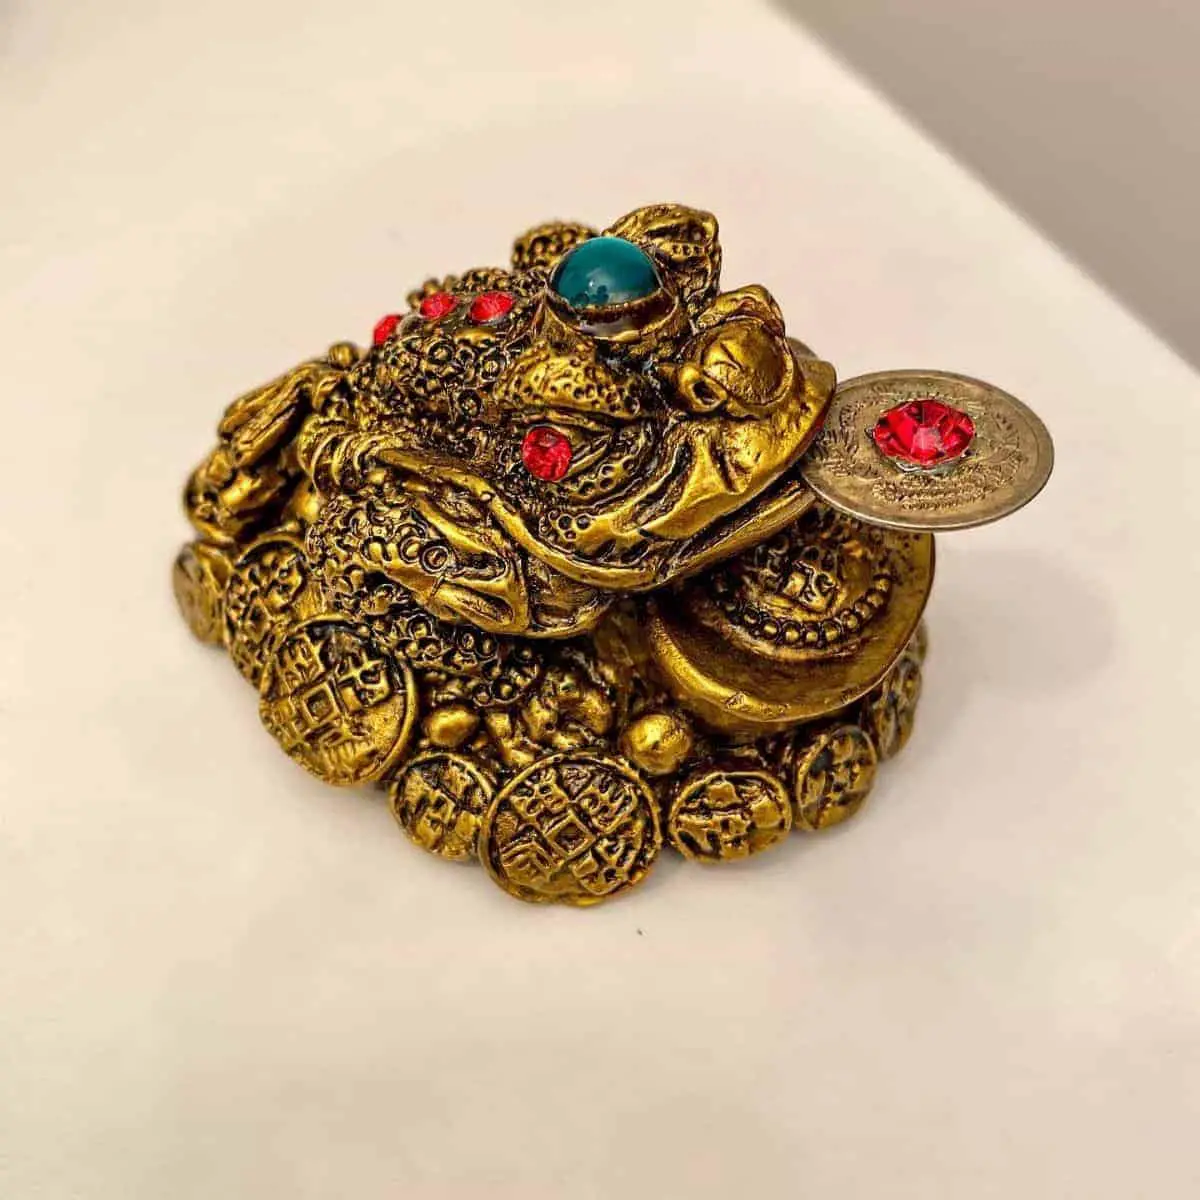 feng shui frog chinese money toad